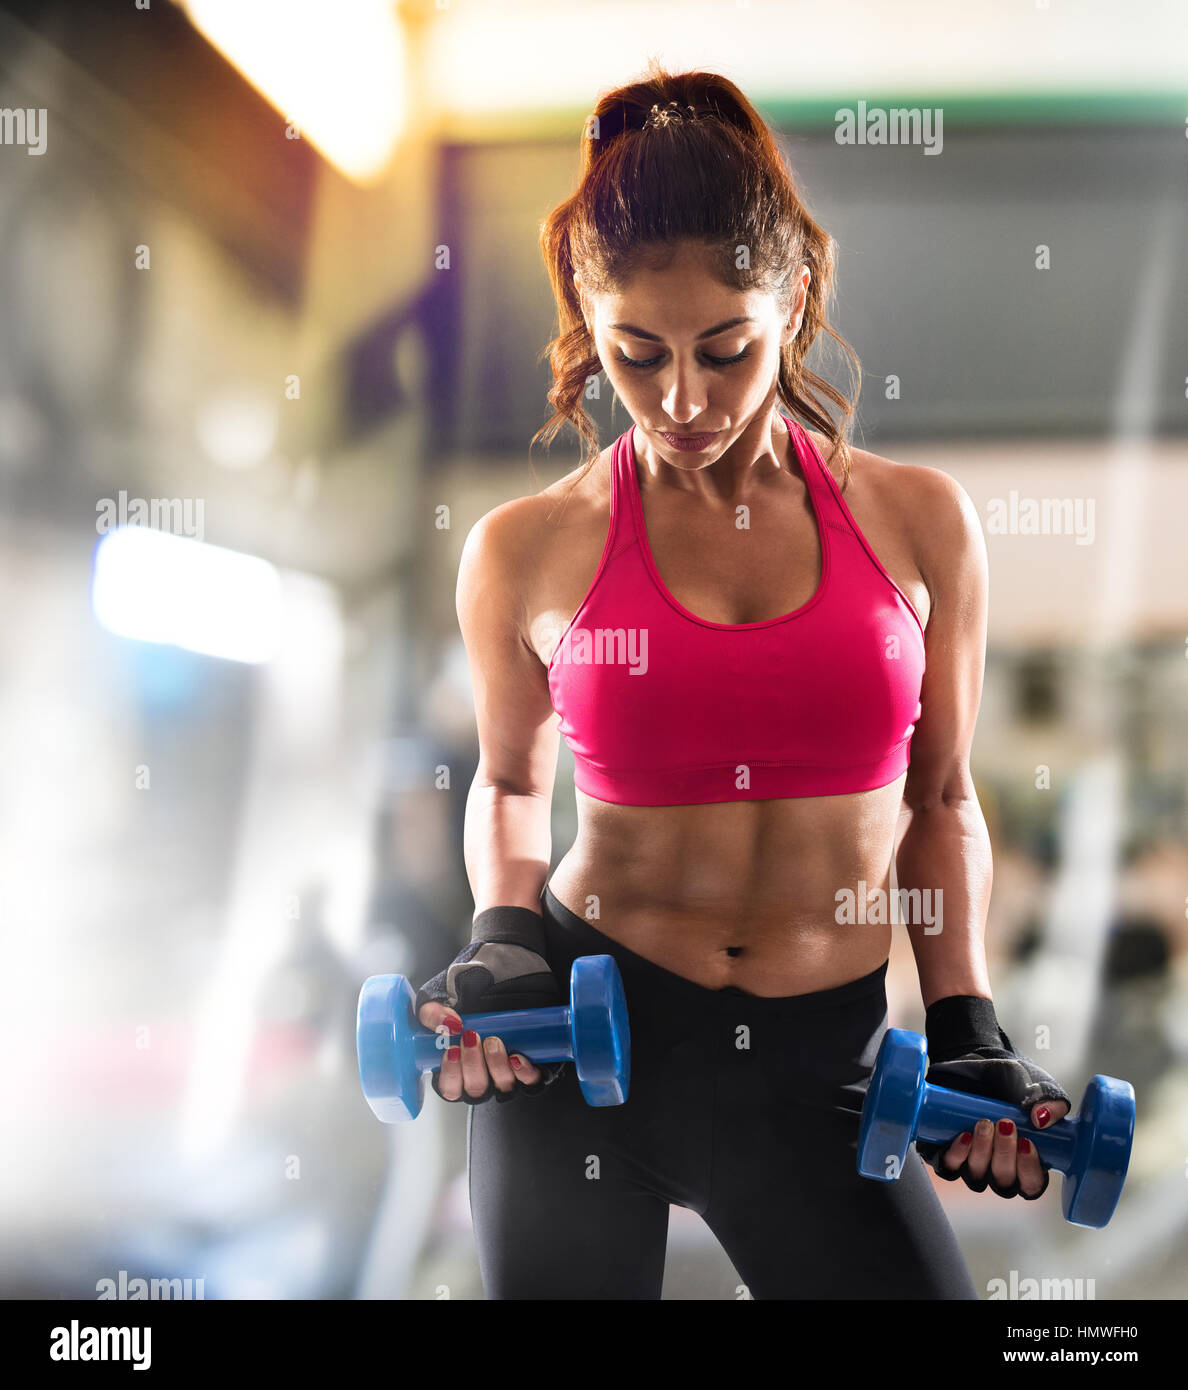 Muscular woman is training at the gym Stock Photo